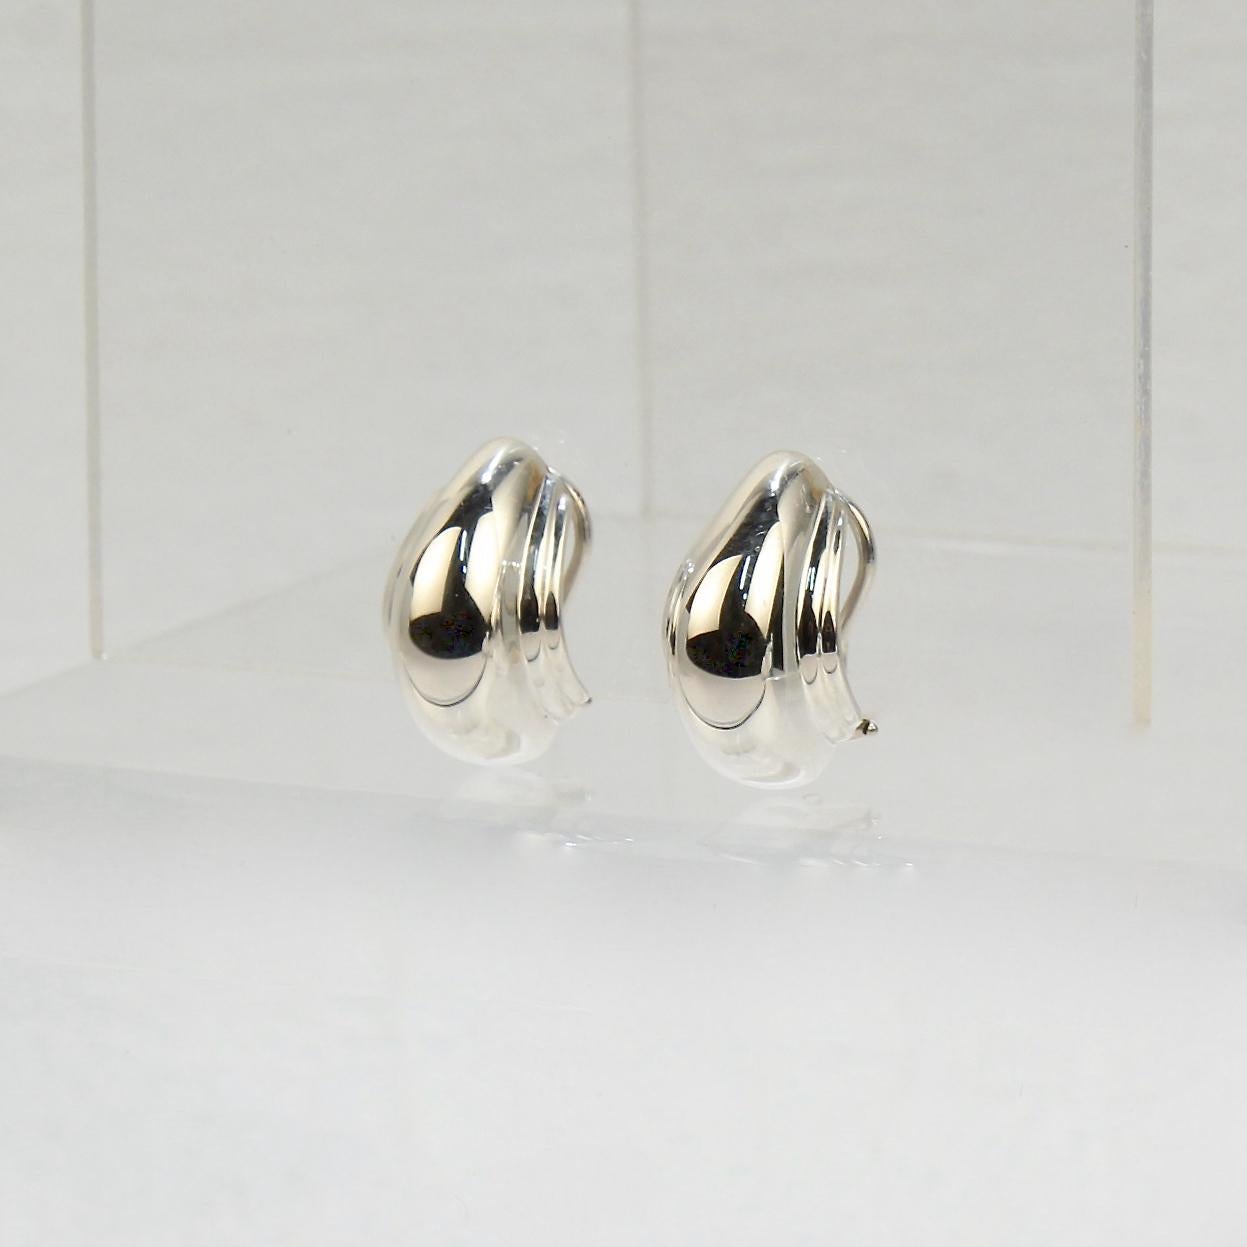 A very fine pair of Tiffany & Co earrings.

In sterling silver.

Designed by Paloma Picasso.

Date:
20th Century

Overall Condition:
They are in overall good, as-pictured, used estate condition with some fine & light surface scratches, and other